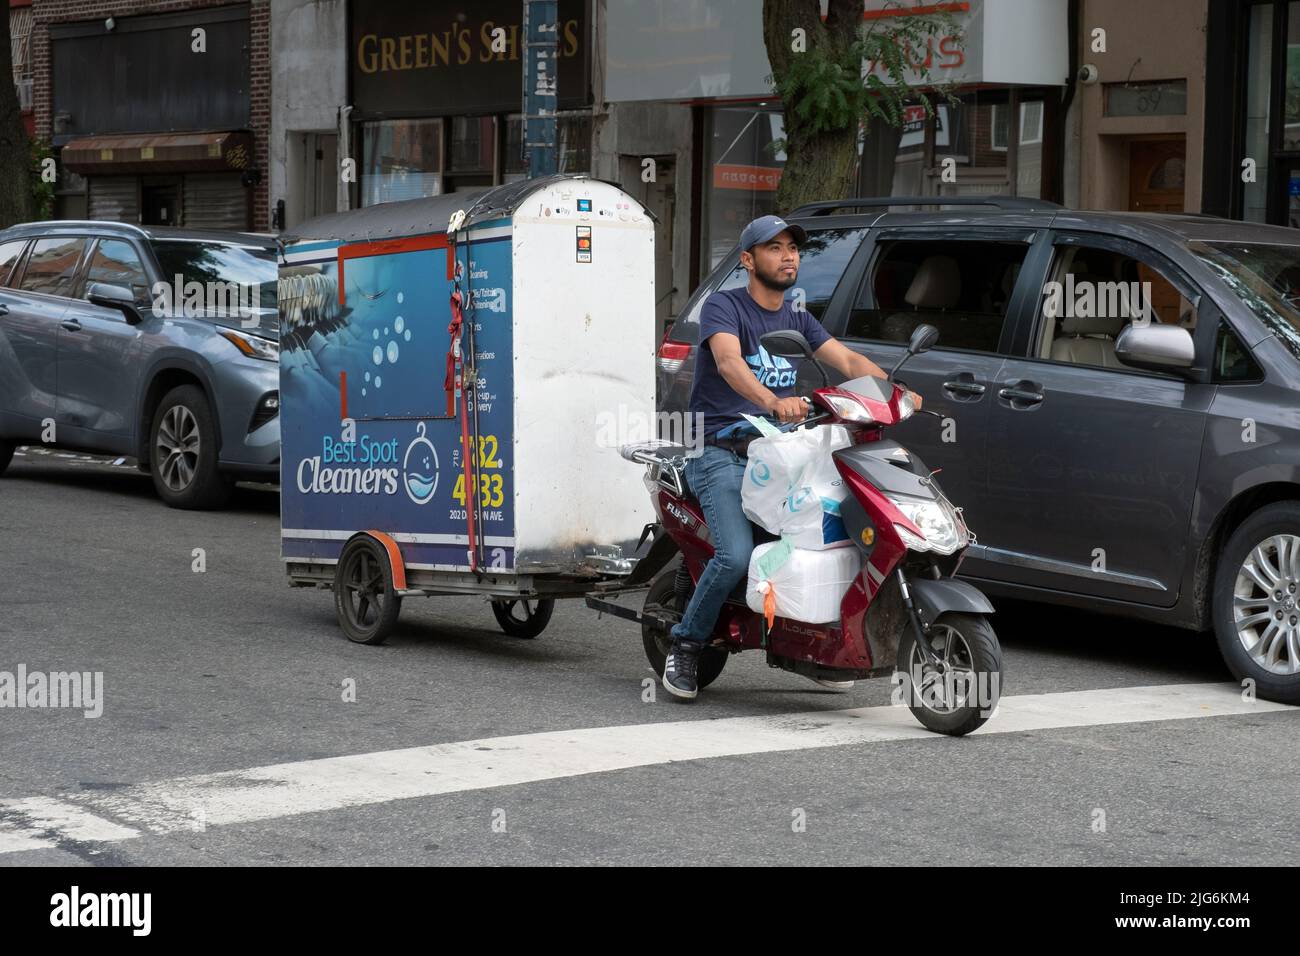 Motorcycle with a portable cupboard closet delivers clean clothes from Best Spot Cleaners on Division St in Williamsburg.  Picture taken on Lee Ave. Stock Photo